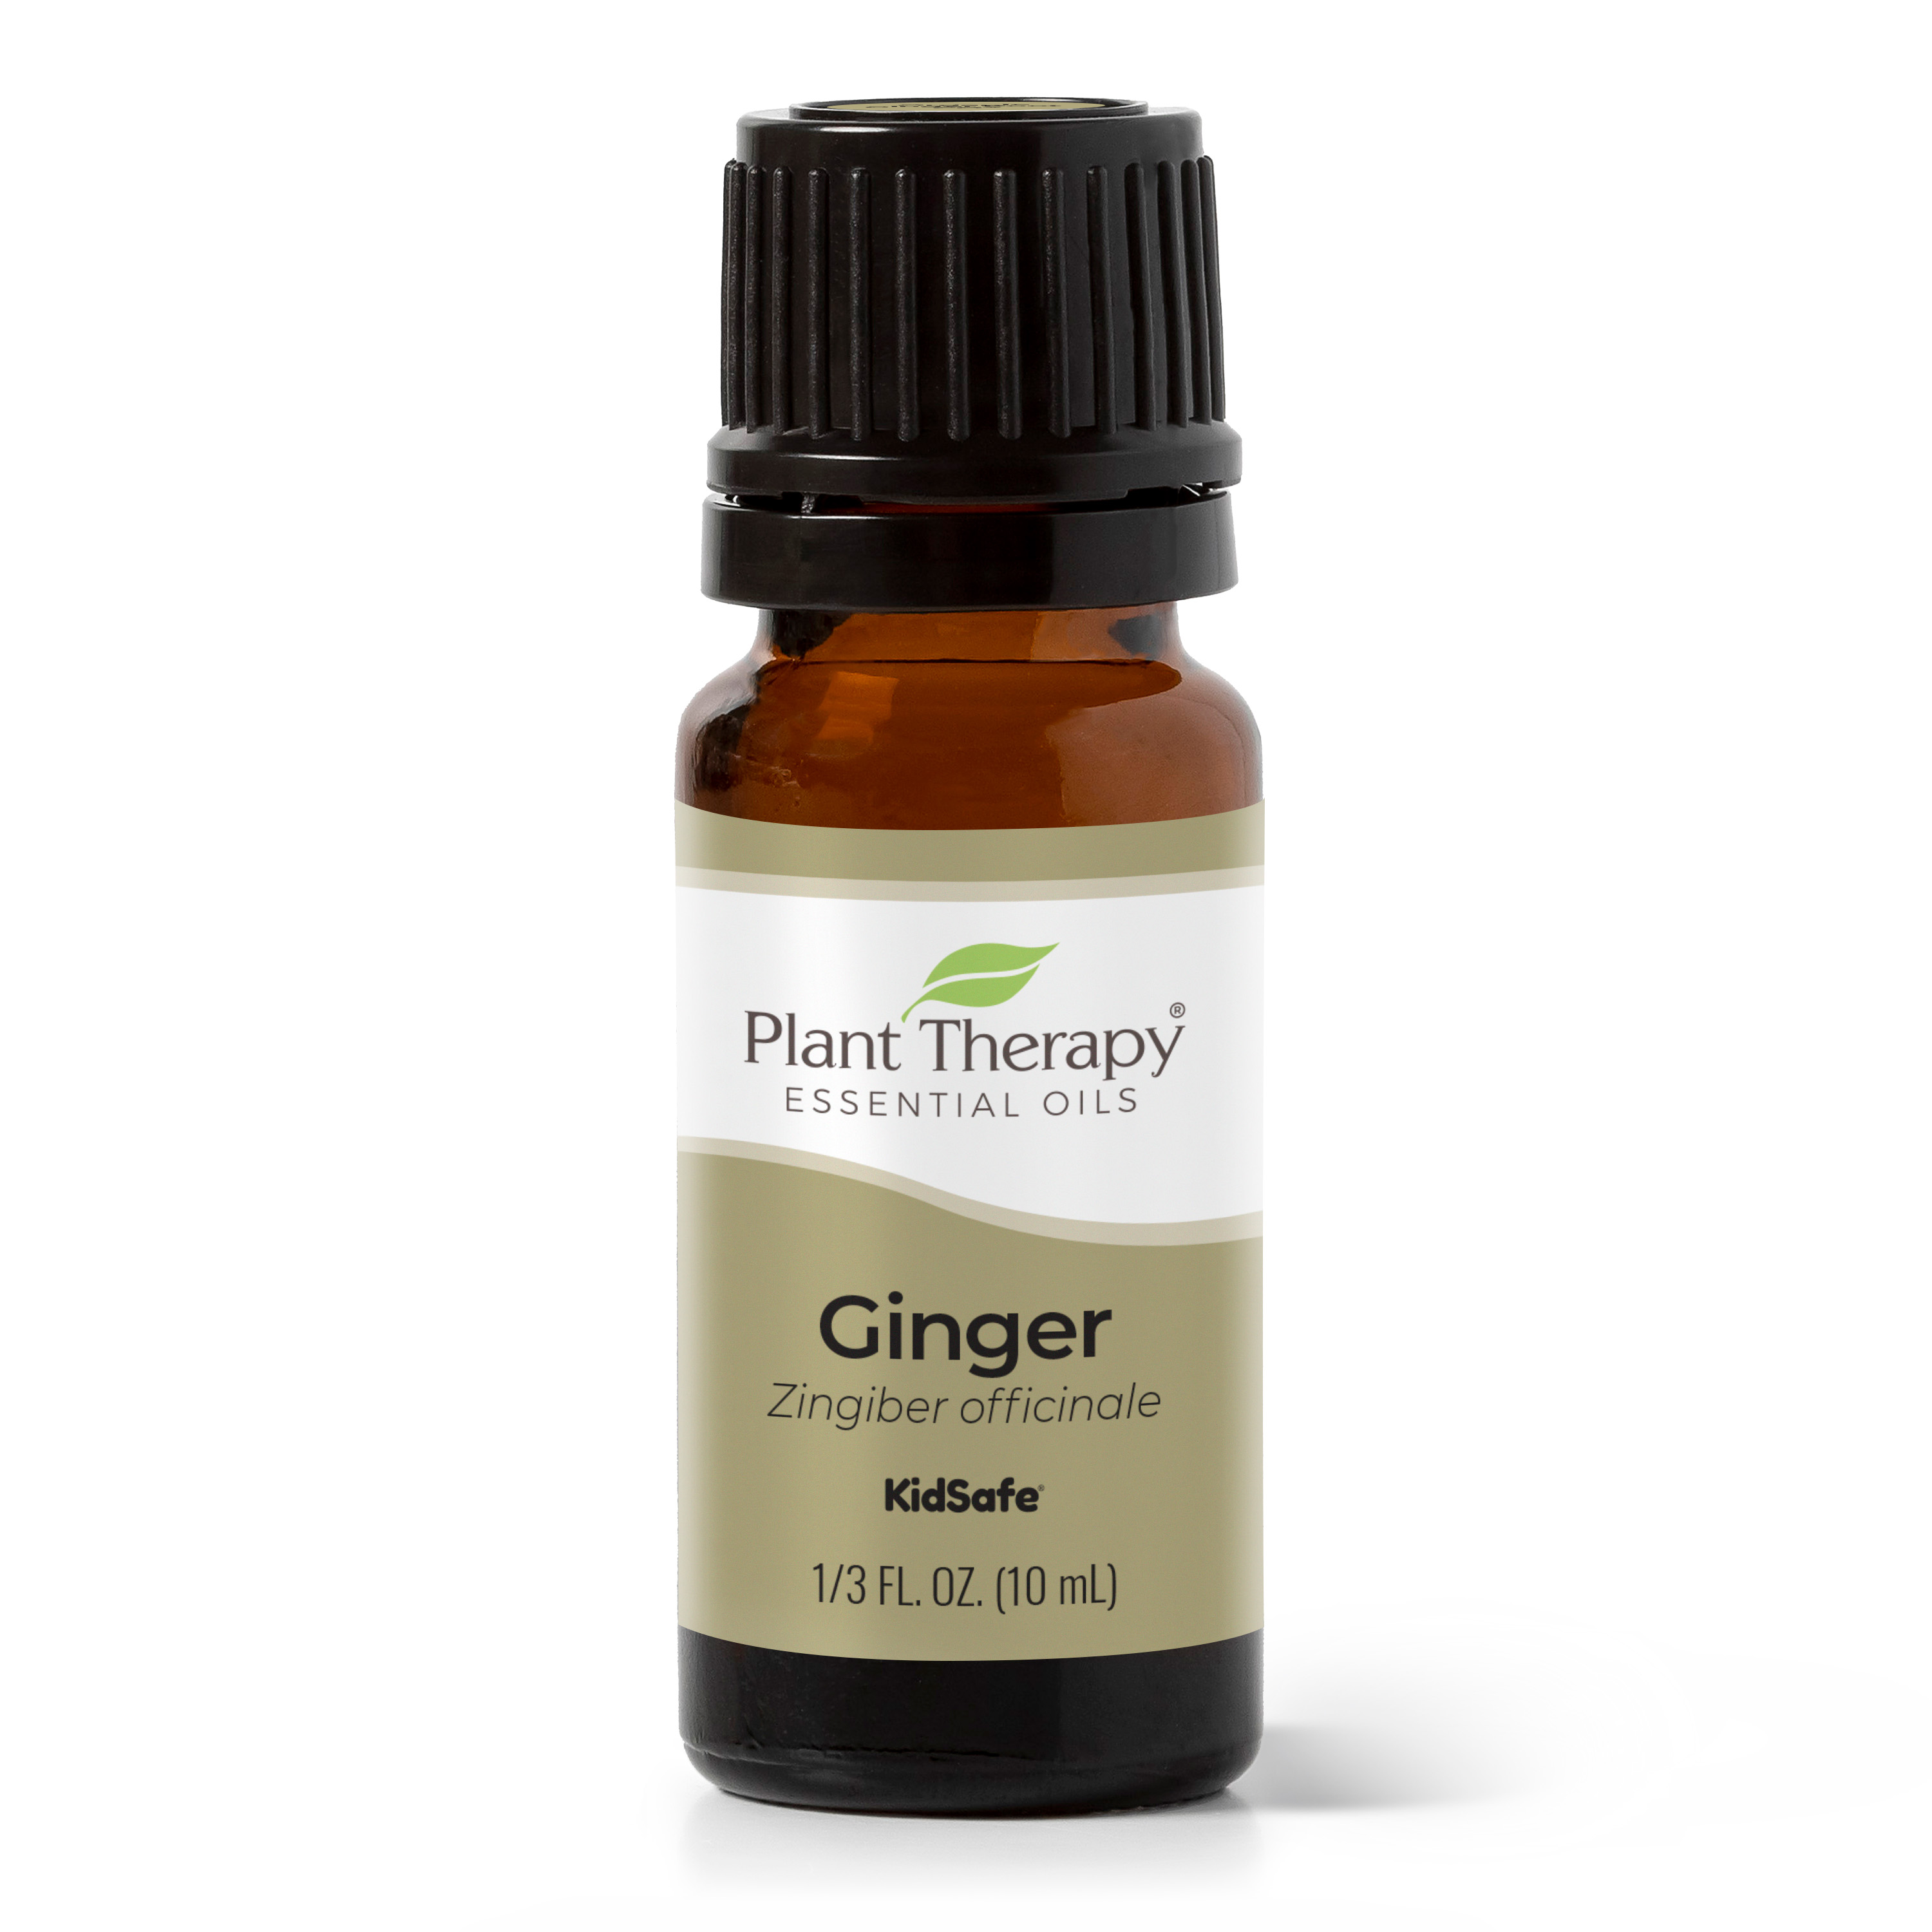 Plant Therapy Ginger Steam Distilled Essential Oil 10 mL (1/3 oz) 100% Pure, Undiluted, Natural Aromatherapy - image 1 of 7